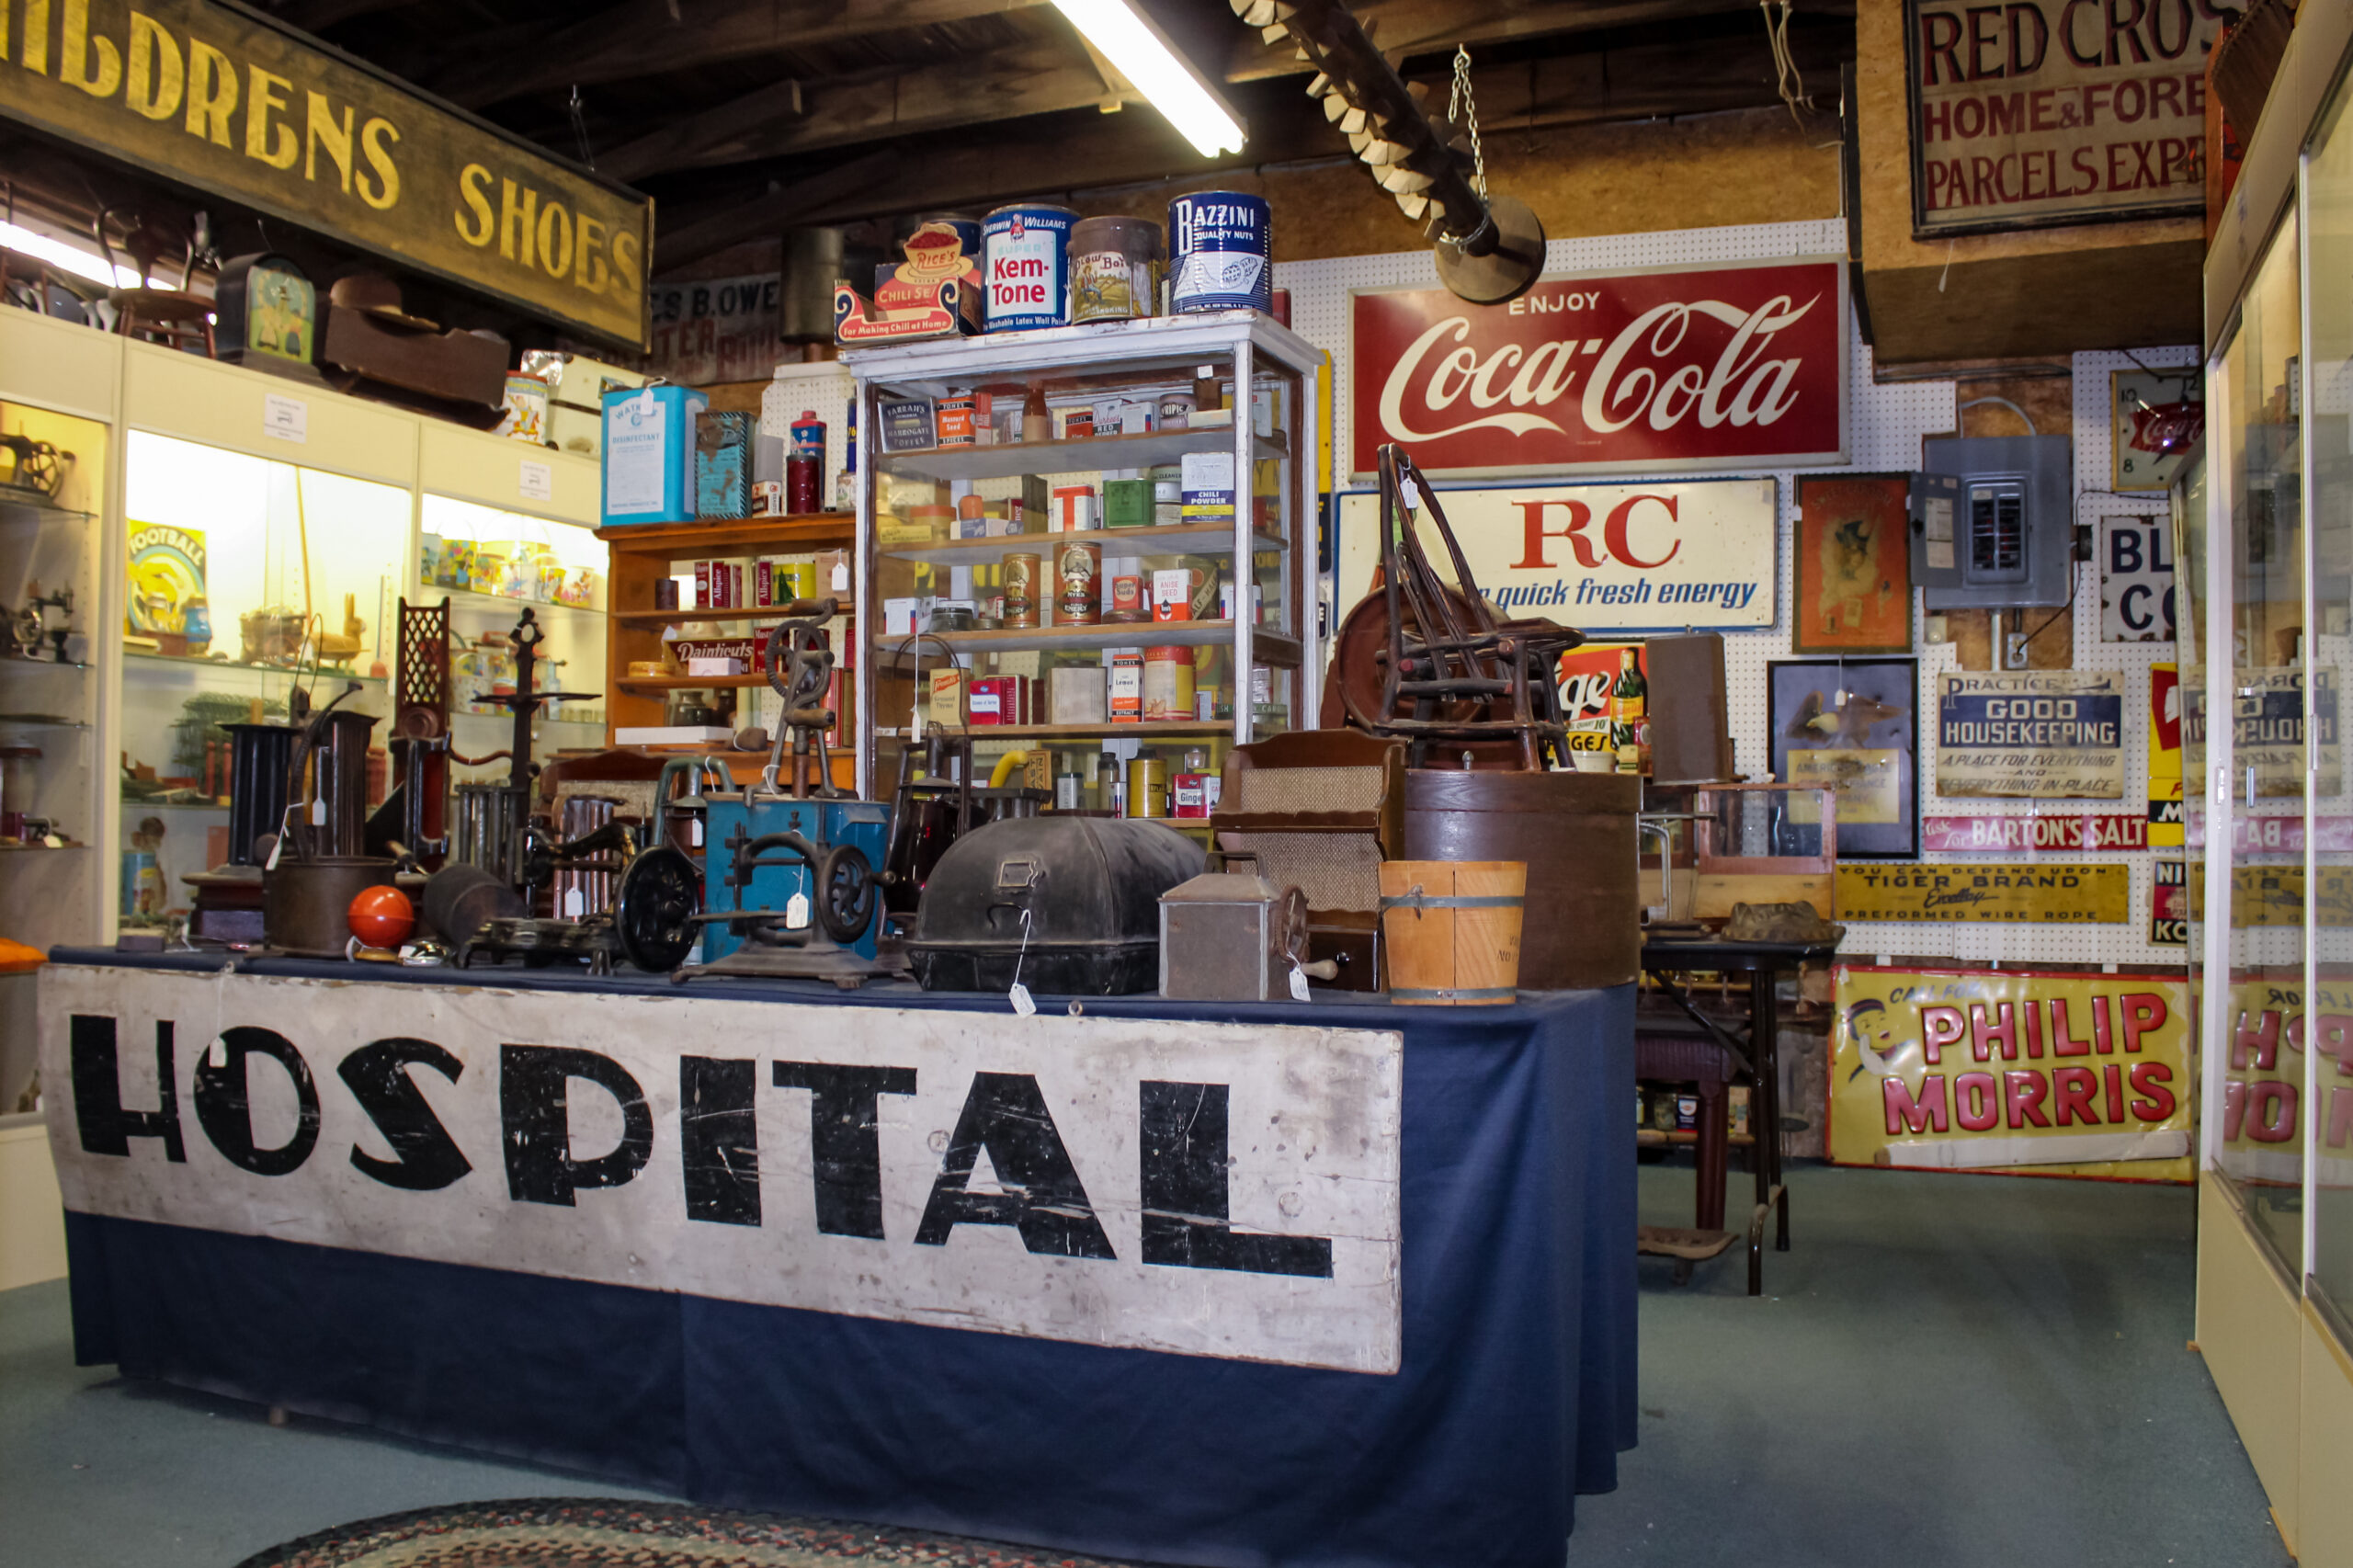 An image with various signs hanging on a wall, cabinets filled with antiques and a blue display table with a sign that says “Hospital” on the front.